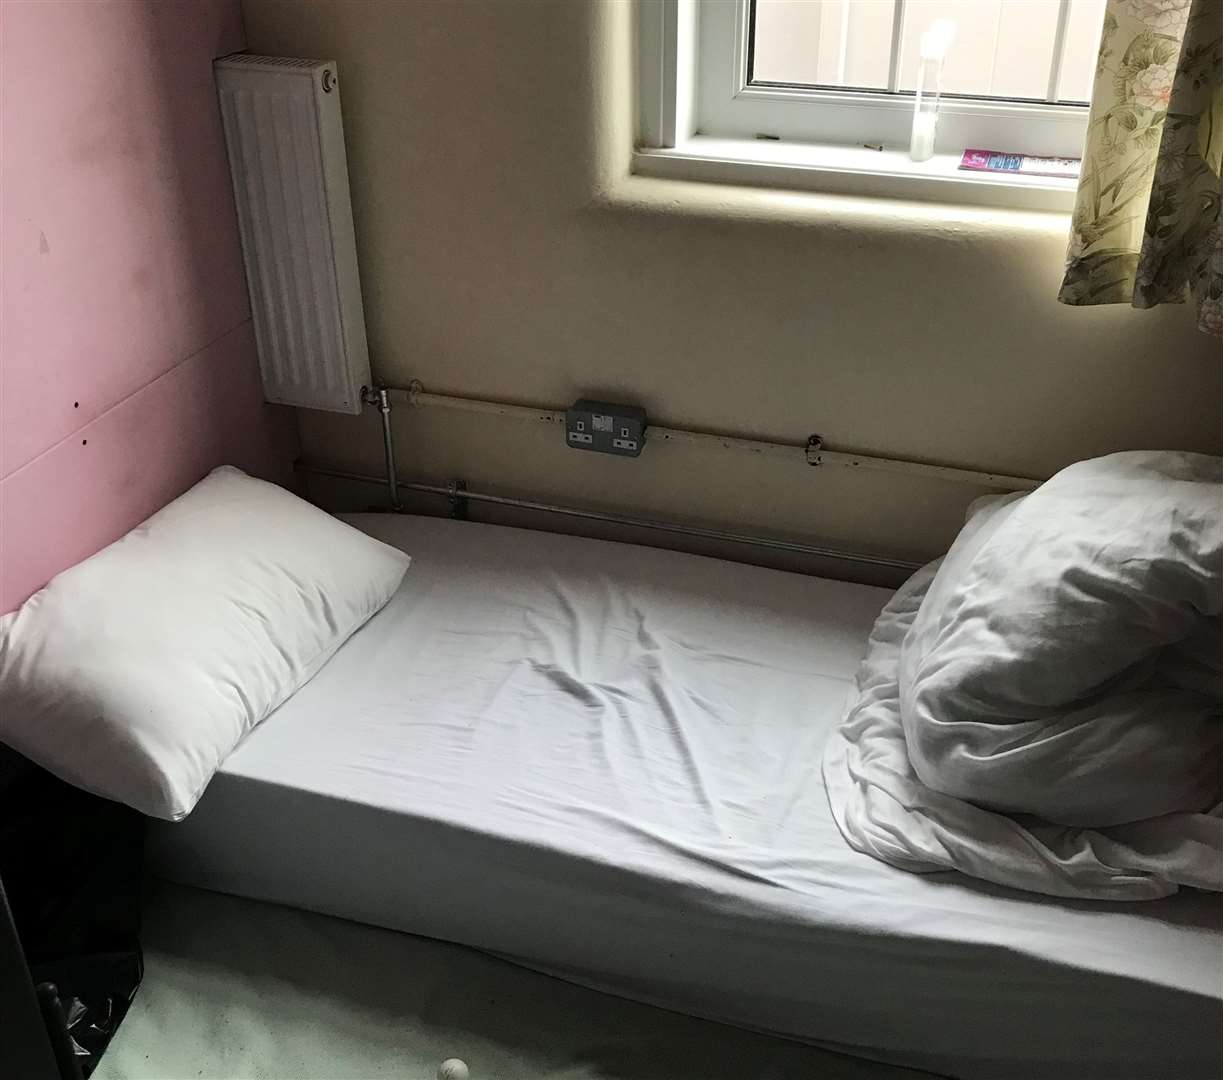 Photos show the sleeping arrangements within the barracks. Picture: Independent Chief Inspector of Borders and Immigration